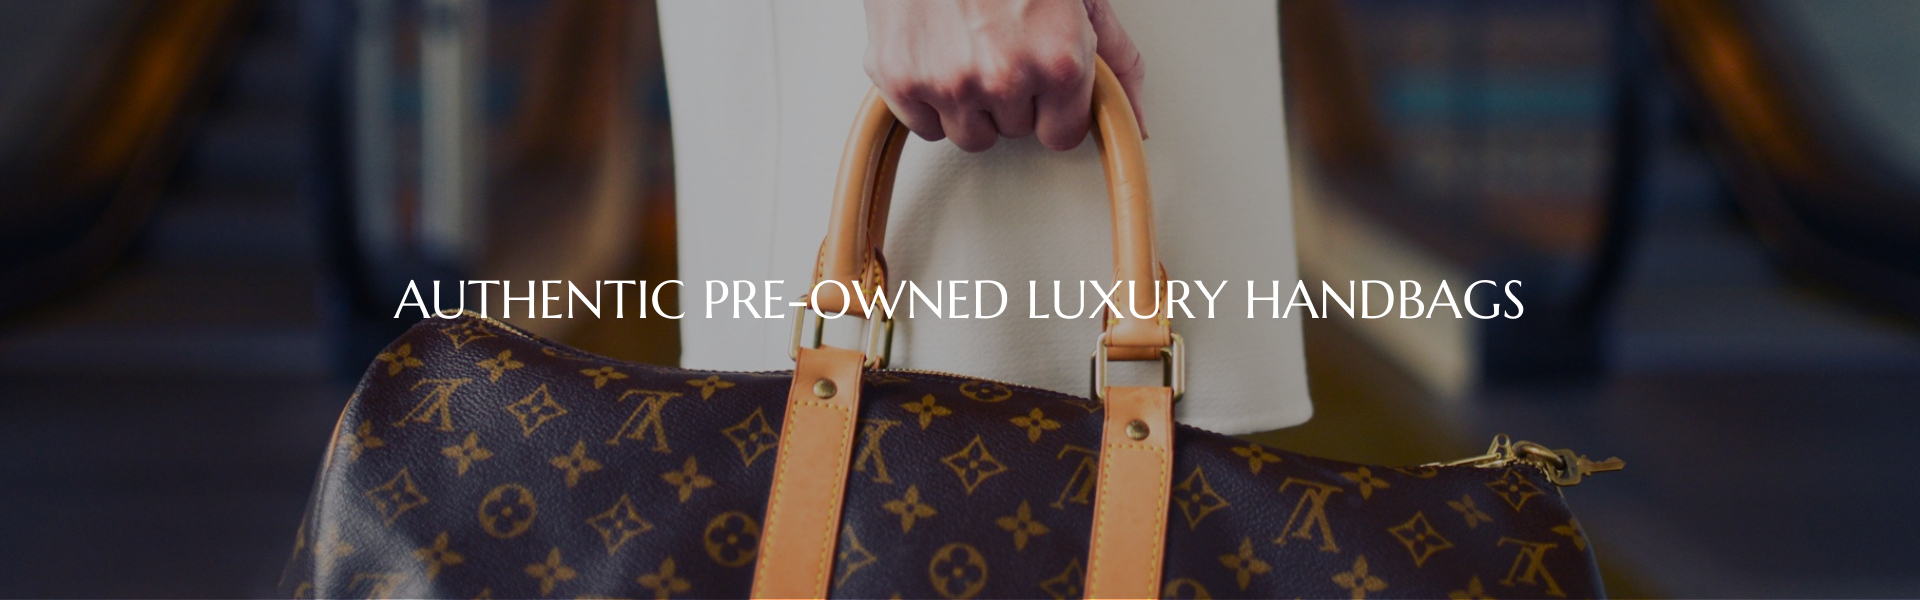 Pre Owned Luxury Handbags  Authentic Bag Brands for Women in WI